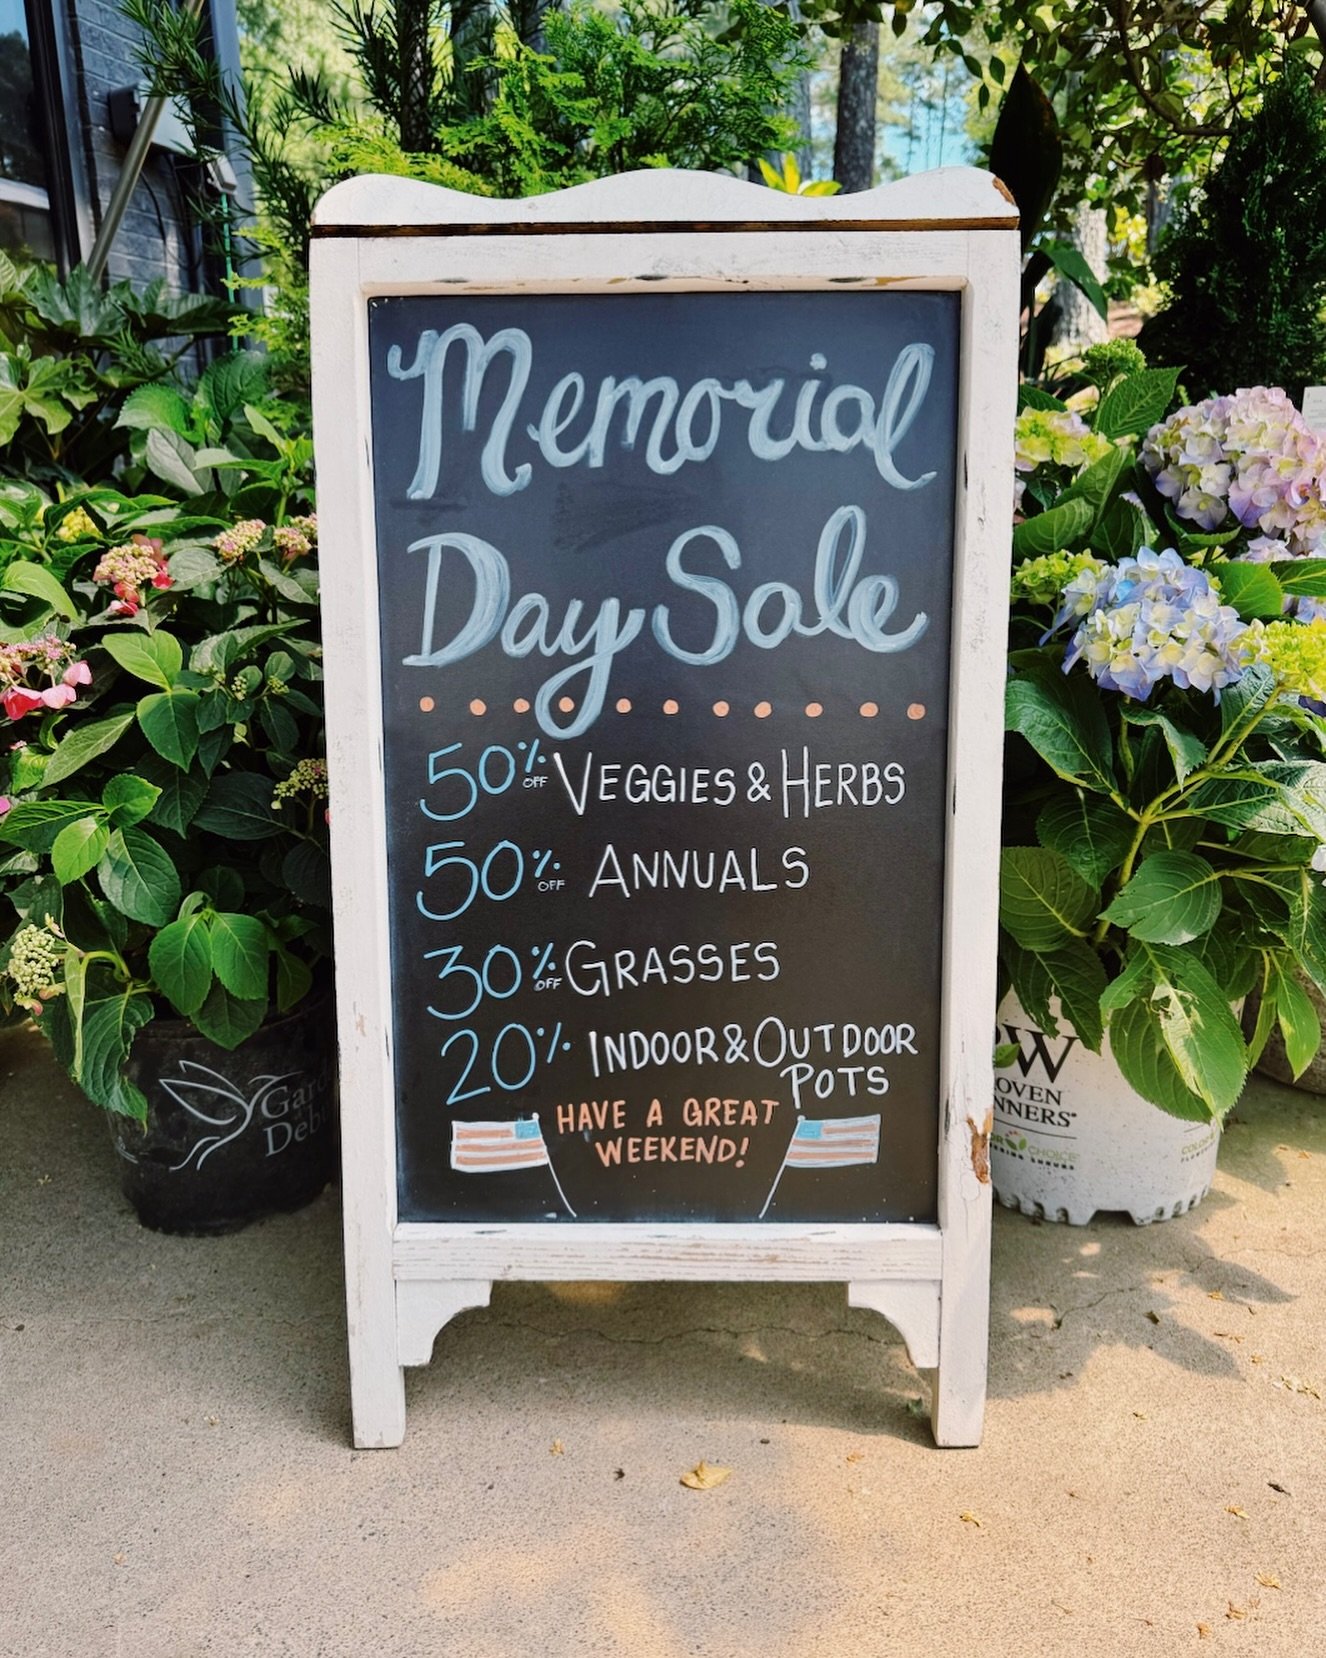 Hey Raleigh 👋 
Norwood is having a Memorial Day Sale this Friday and Saturday! May 24th-25th🇺🇸 

- 20% off all Indoor/Outdoor pots *excluding fountains*
- 30% off all Grasses
- 50% off all Veggies/Herbs/Annuals

#norwoodroadgardens #memotialdaysal